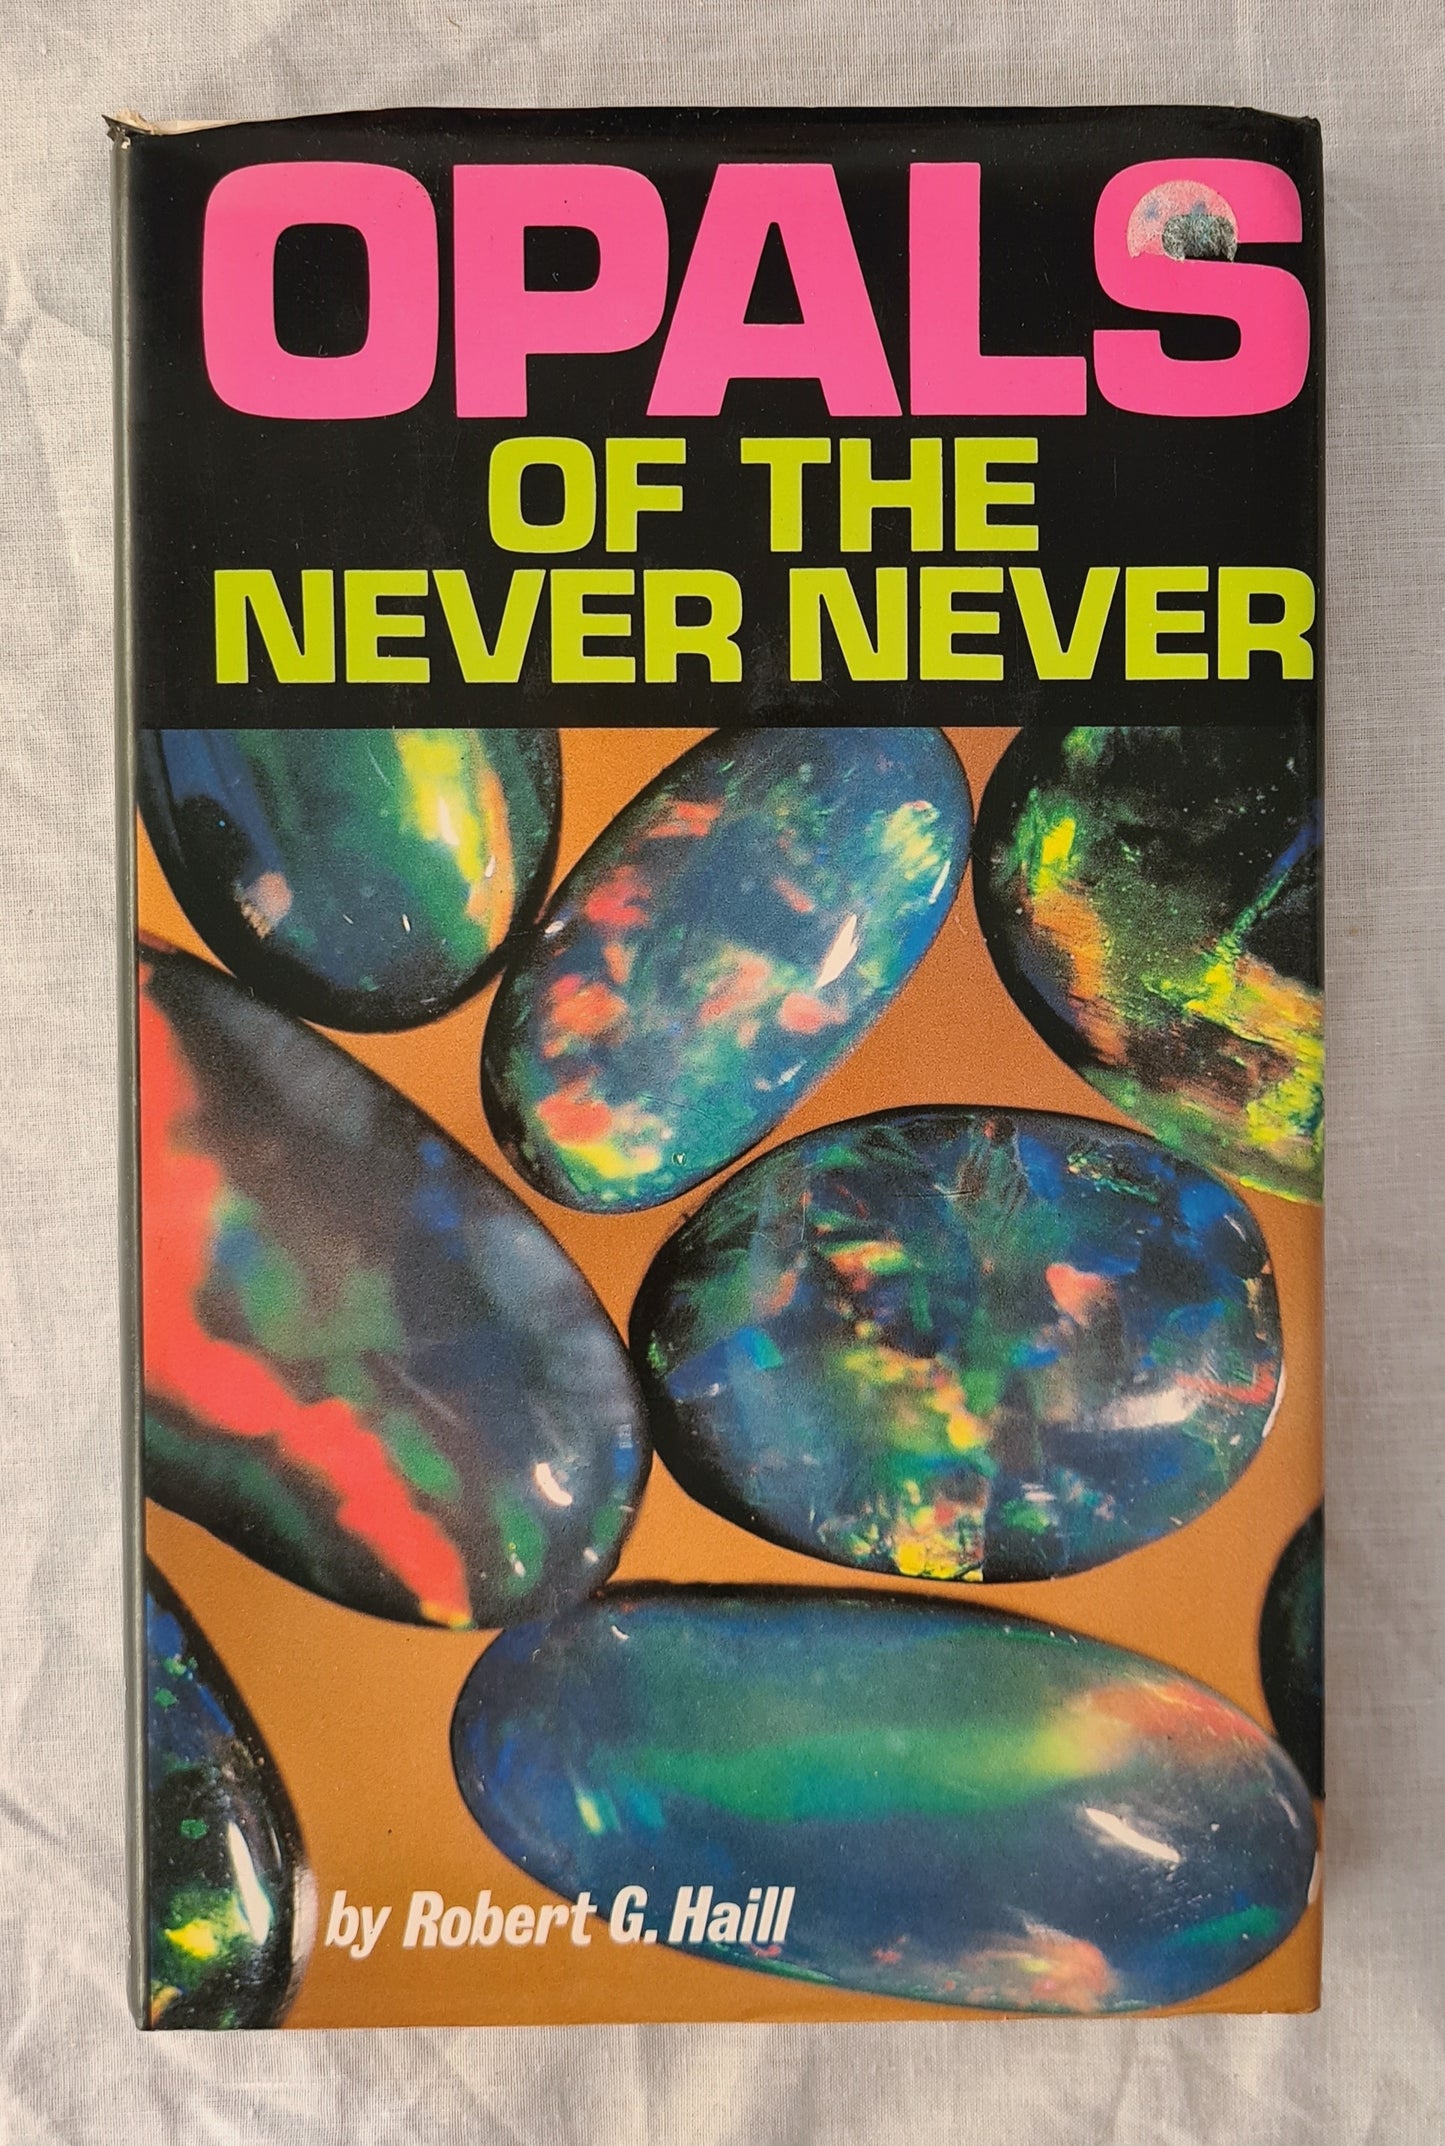 Opals of the Never Never by Robert G. Haill